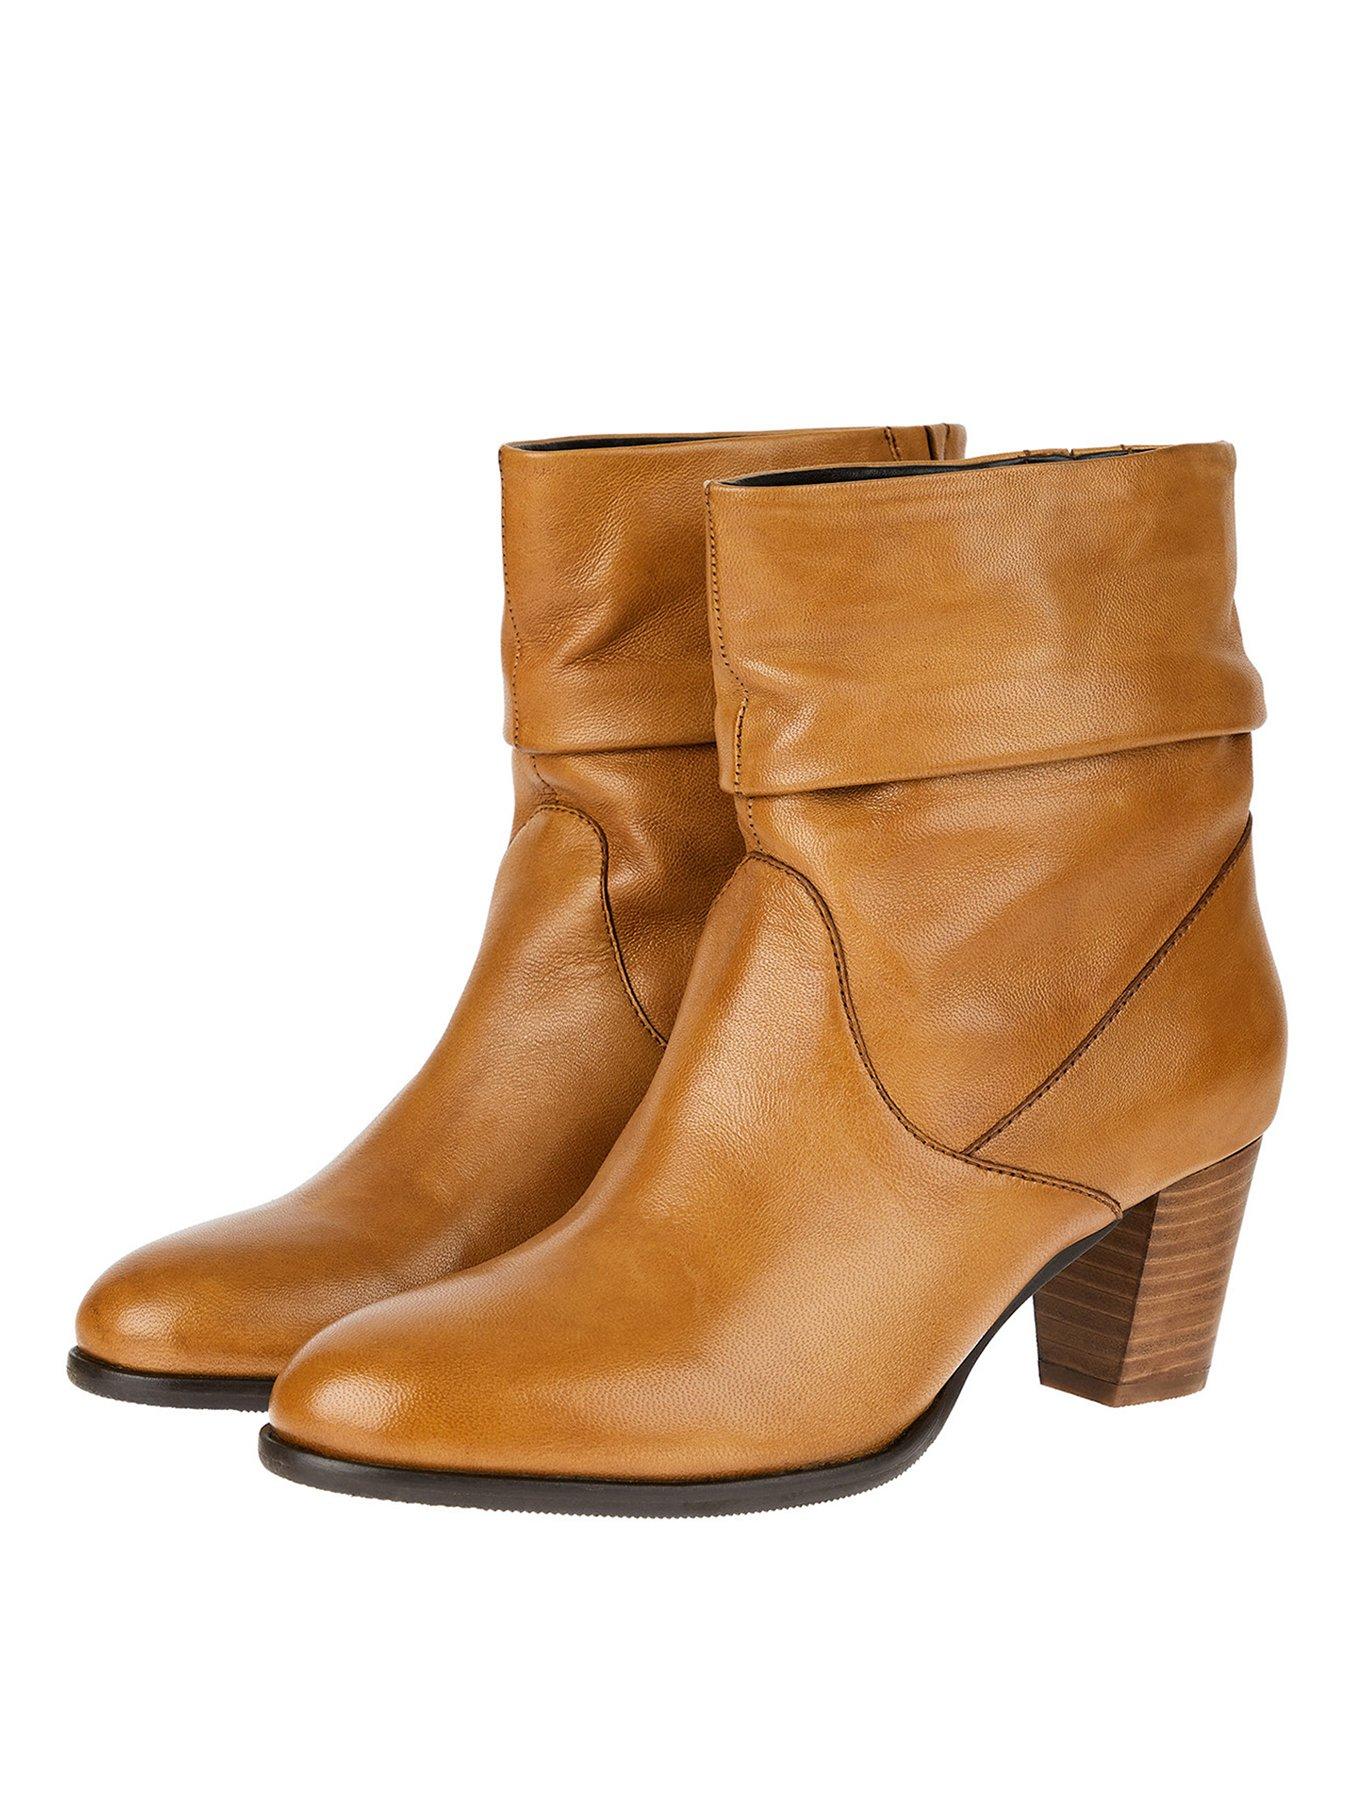 slouch ankle boots uk